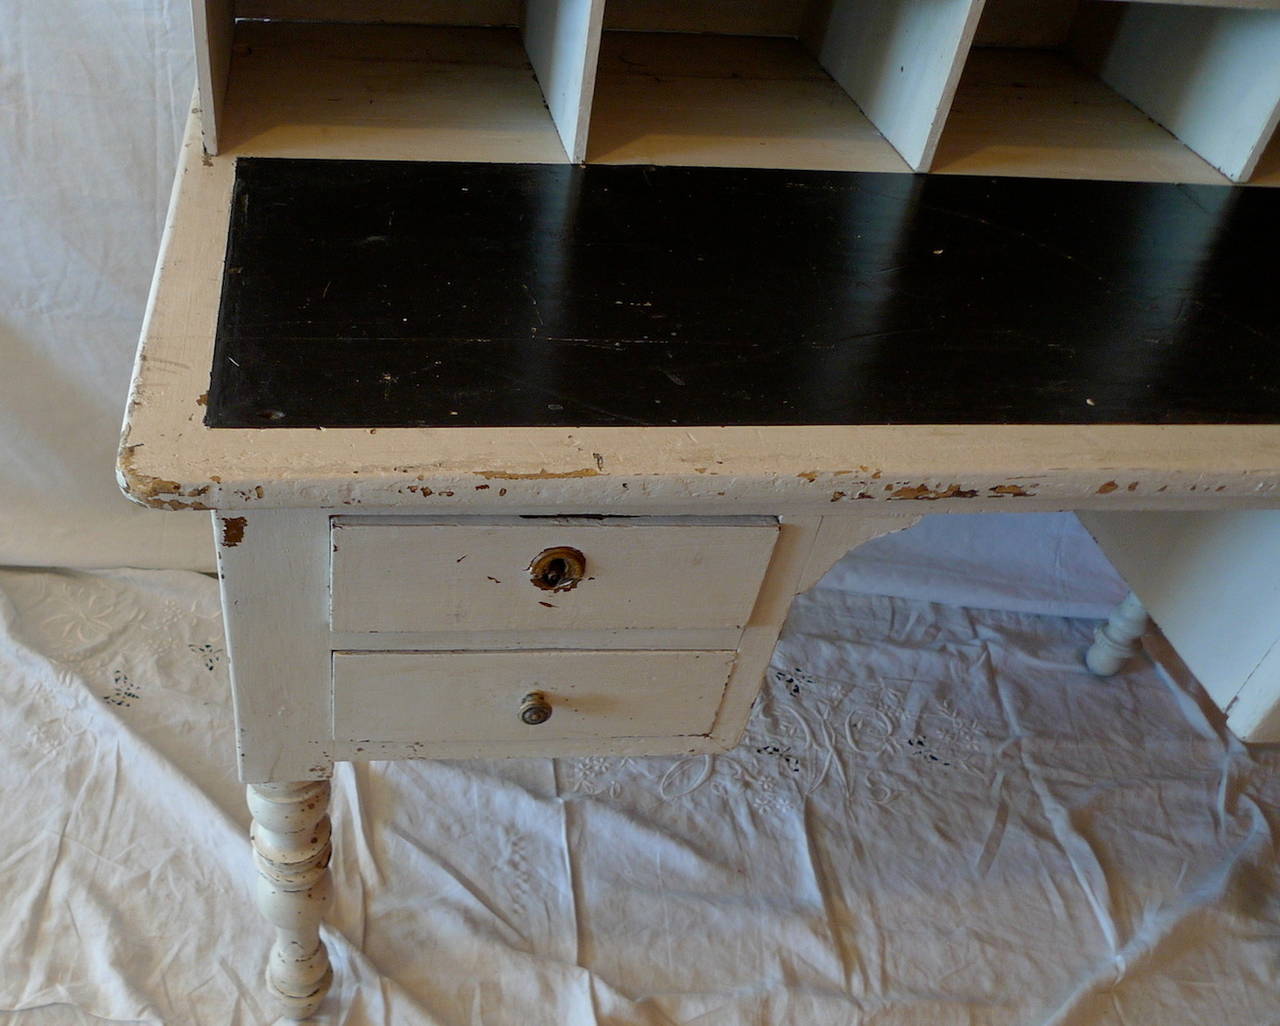 French xix postman's desk, 2 piece, with 8 post compartments on top, desk top and 3 drawers on bottom section. All painted